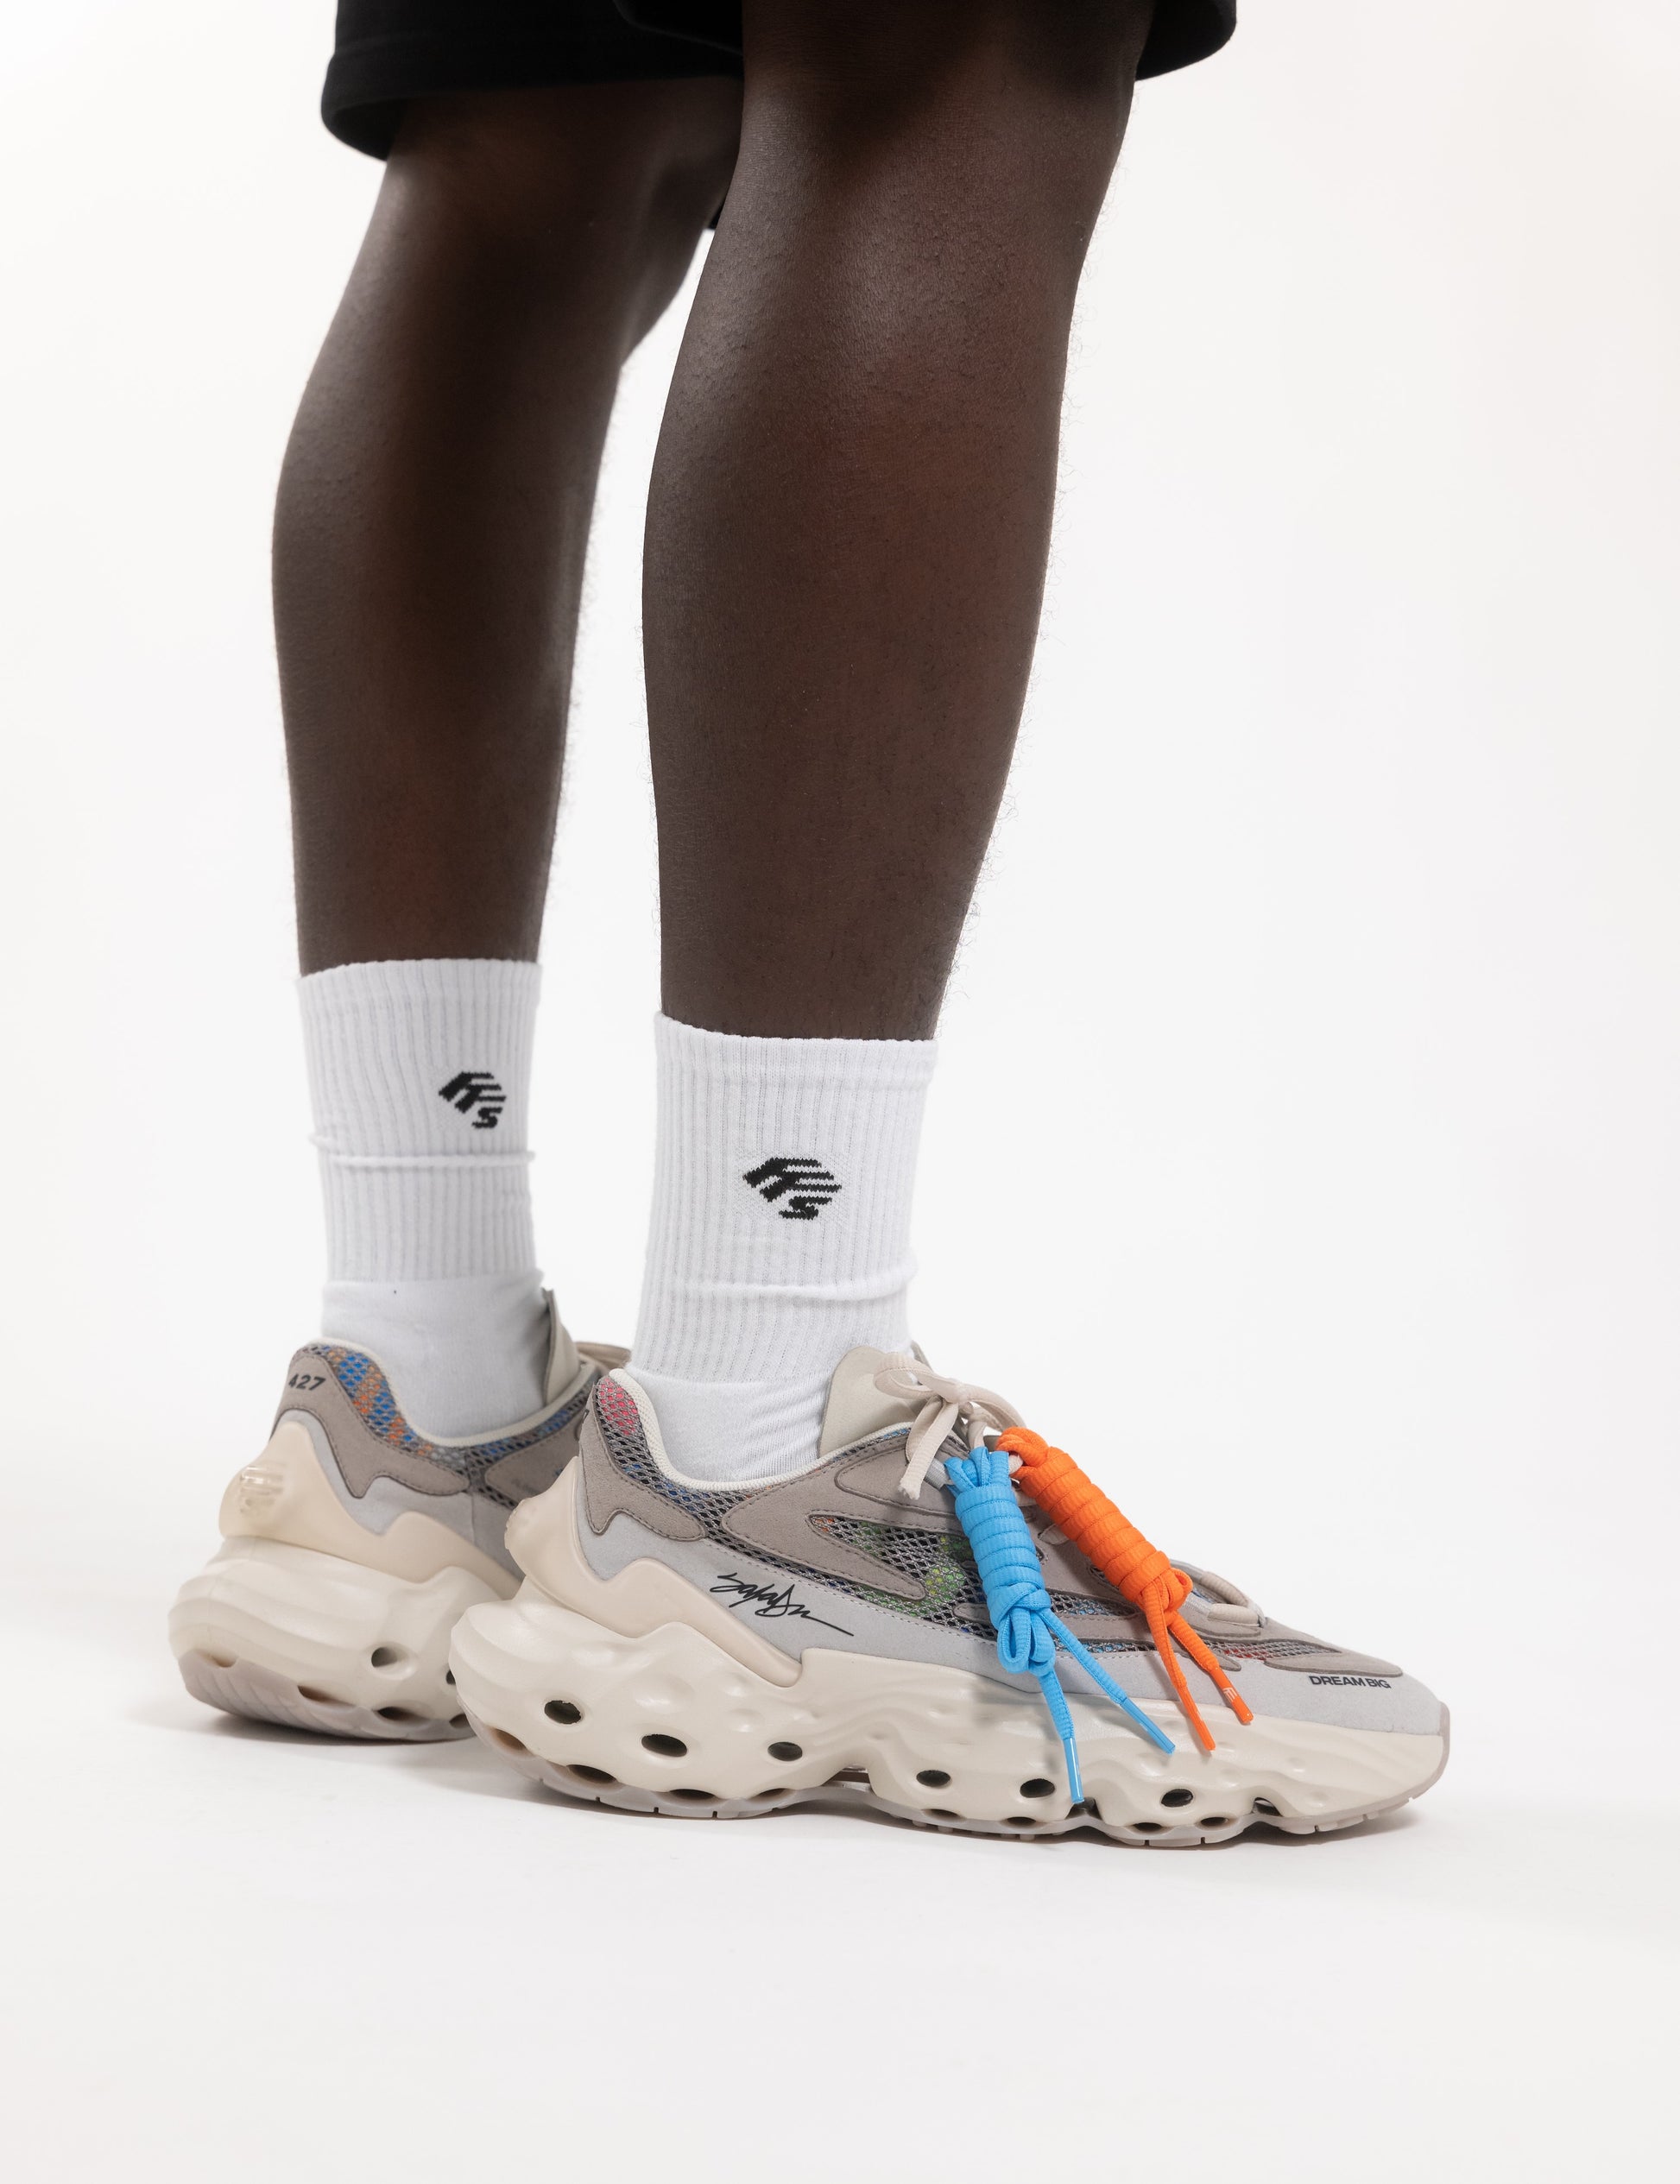 Flowers for Society Sneaker Seed.One King Saladeen collaboration lateral worn by model standing straight